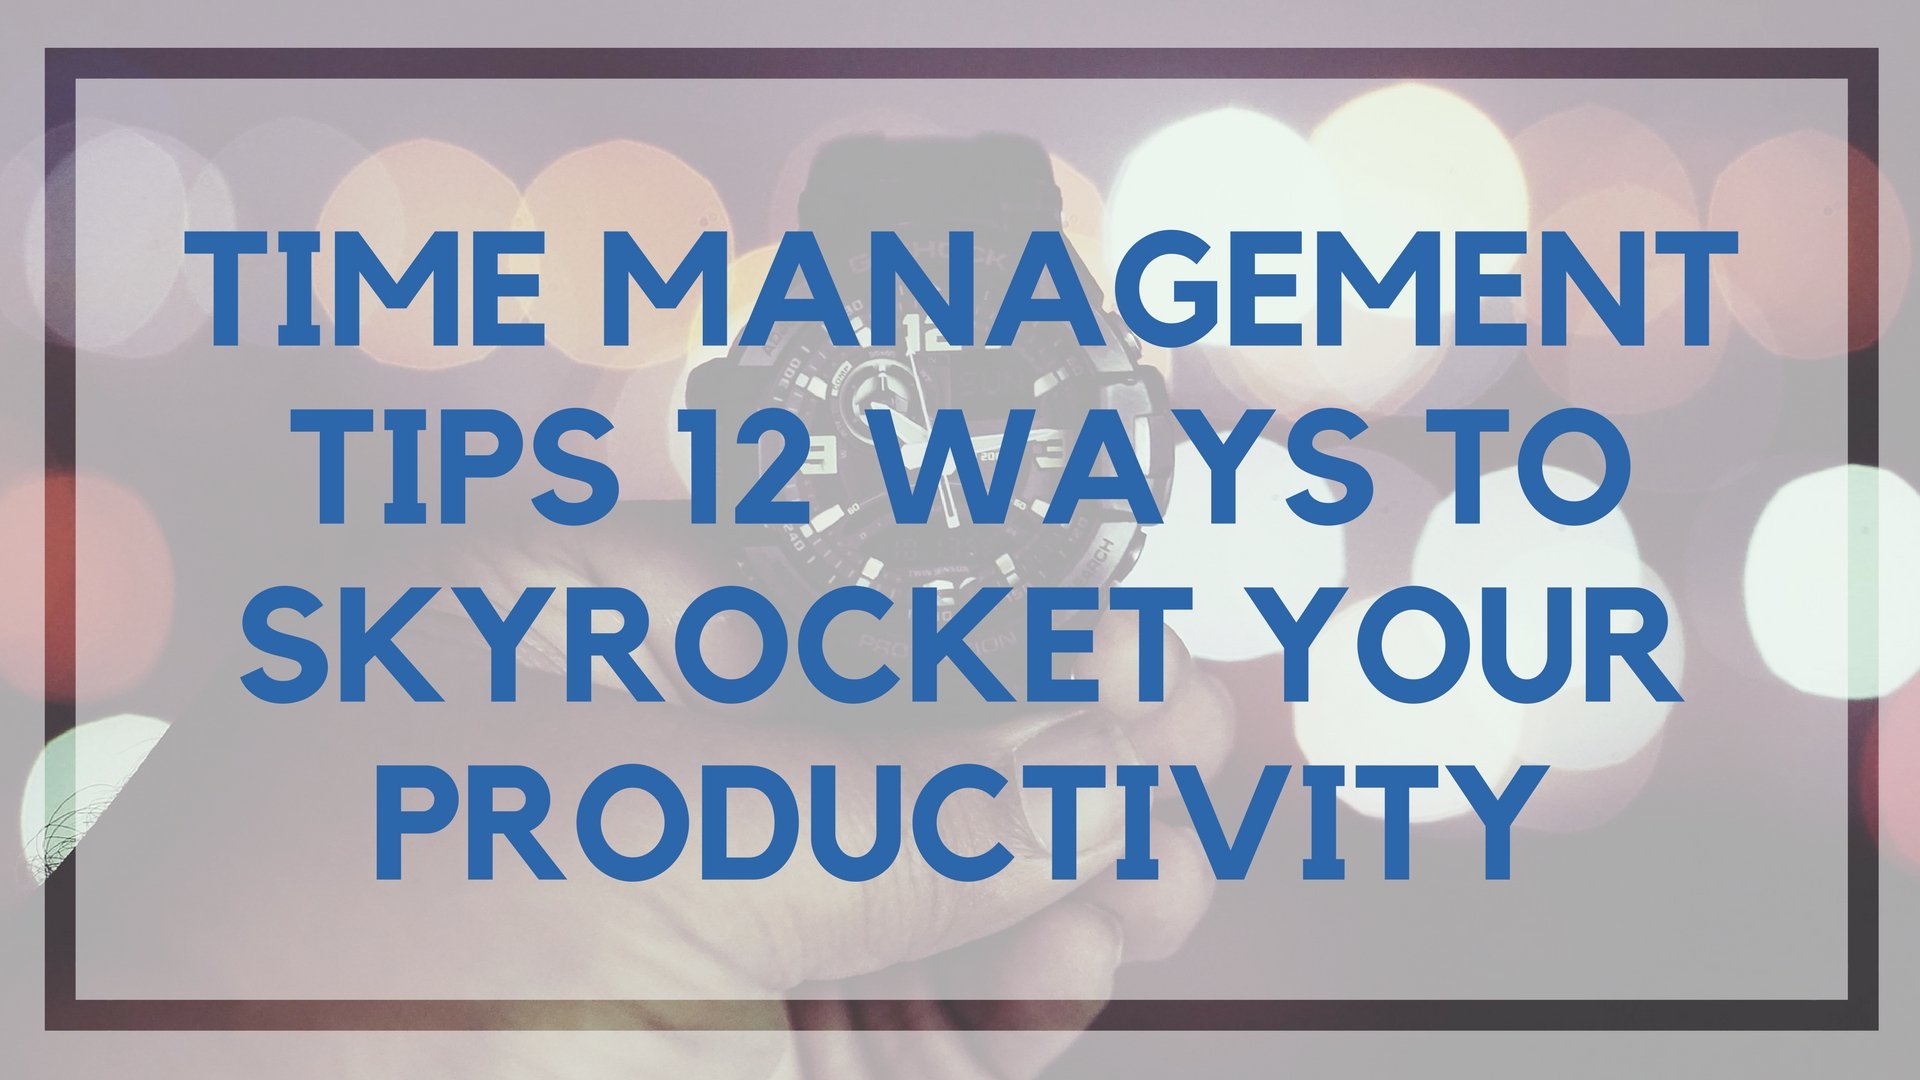 Time Management Tips: 12 Ways To Skyrocket Your Productivity1920 x 1080